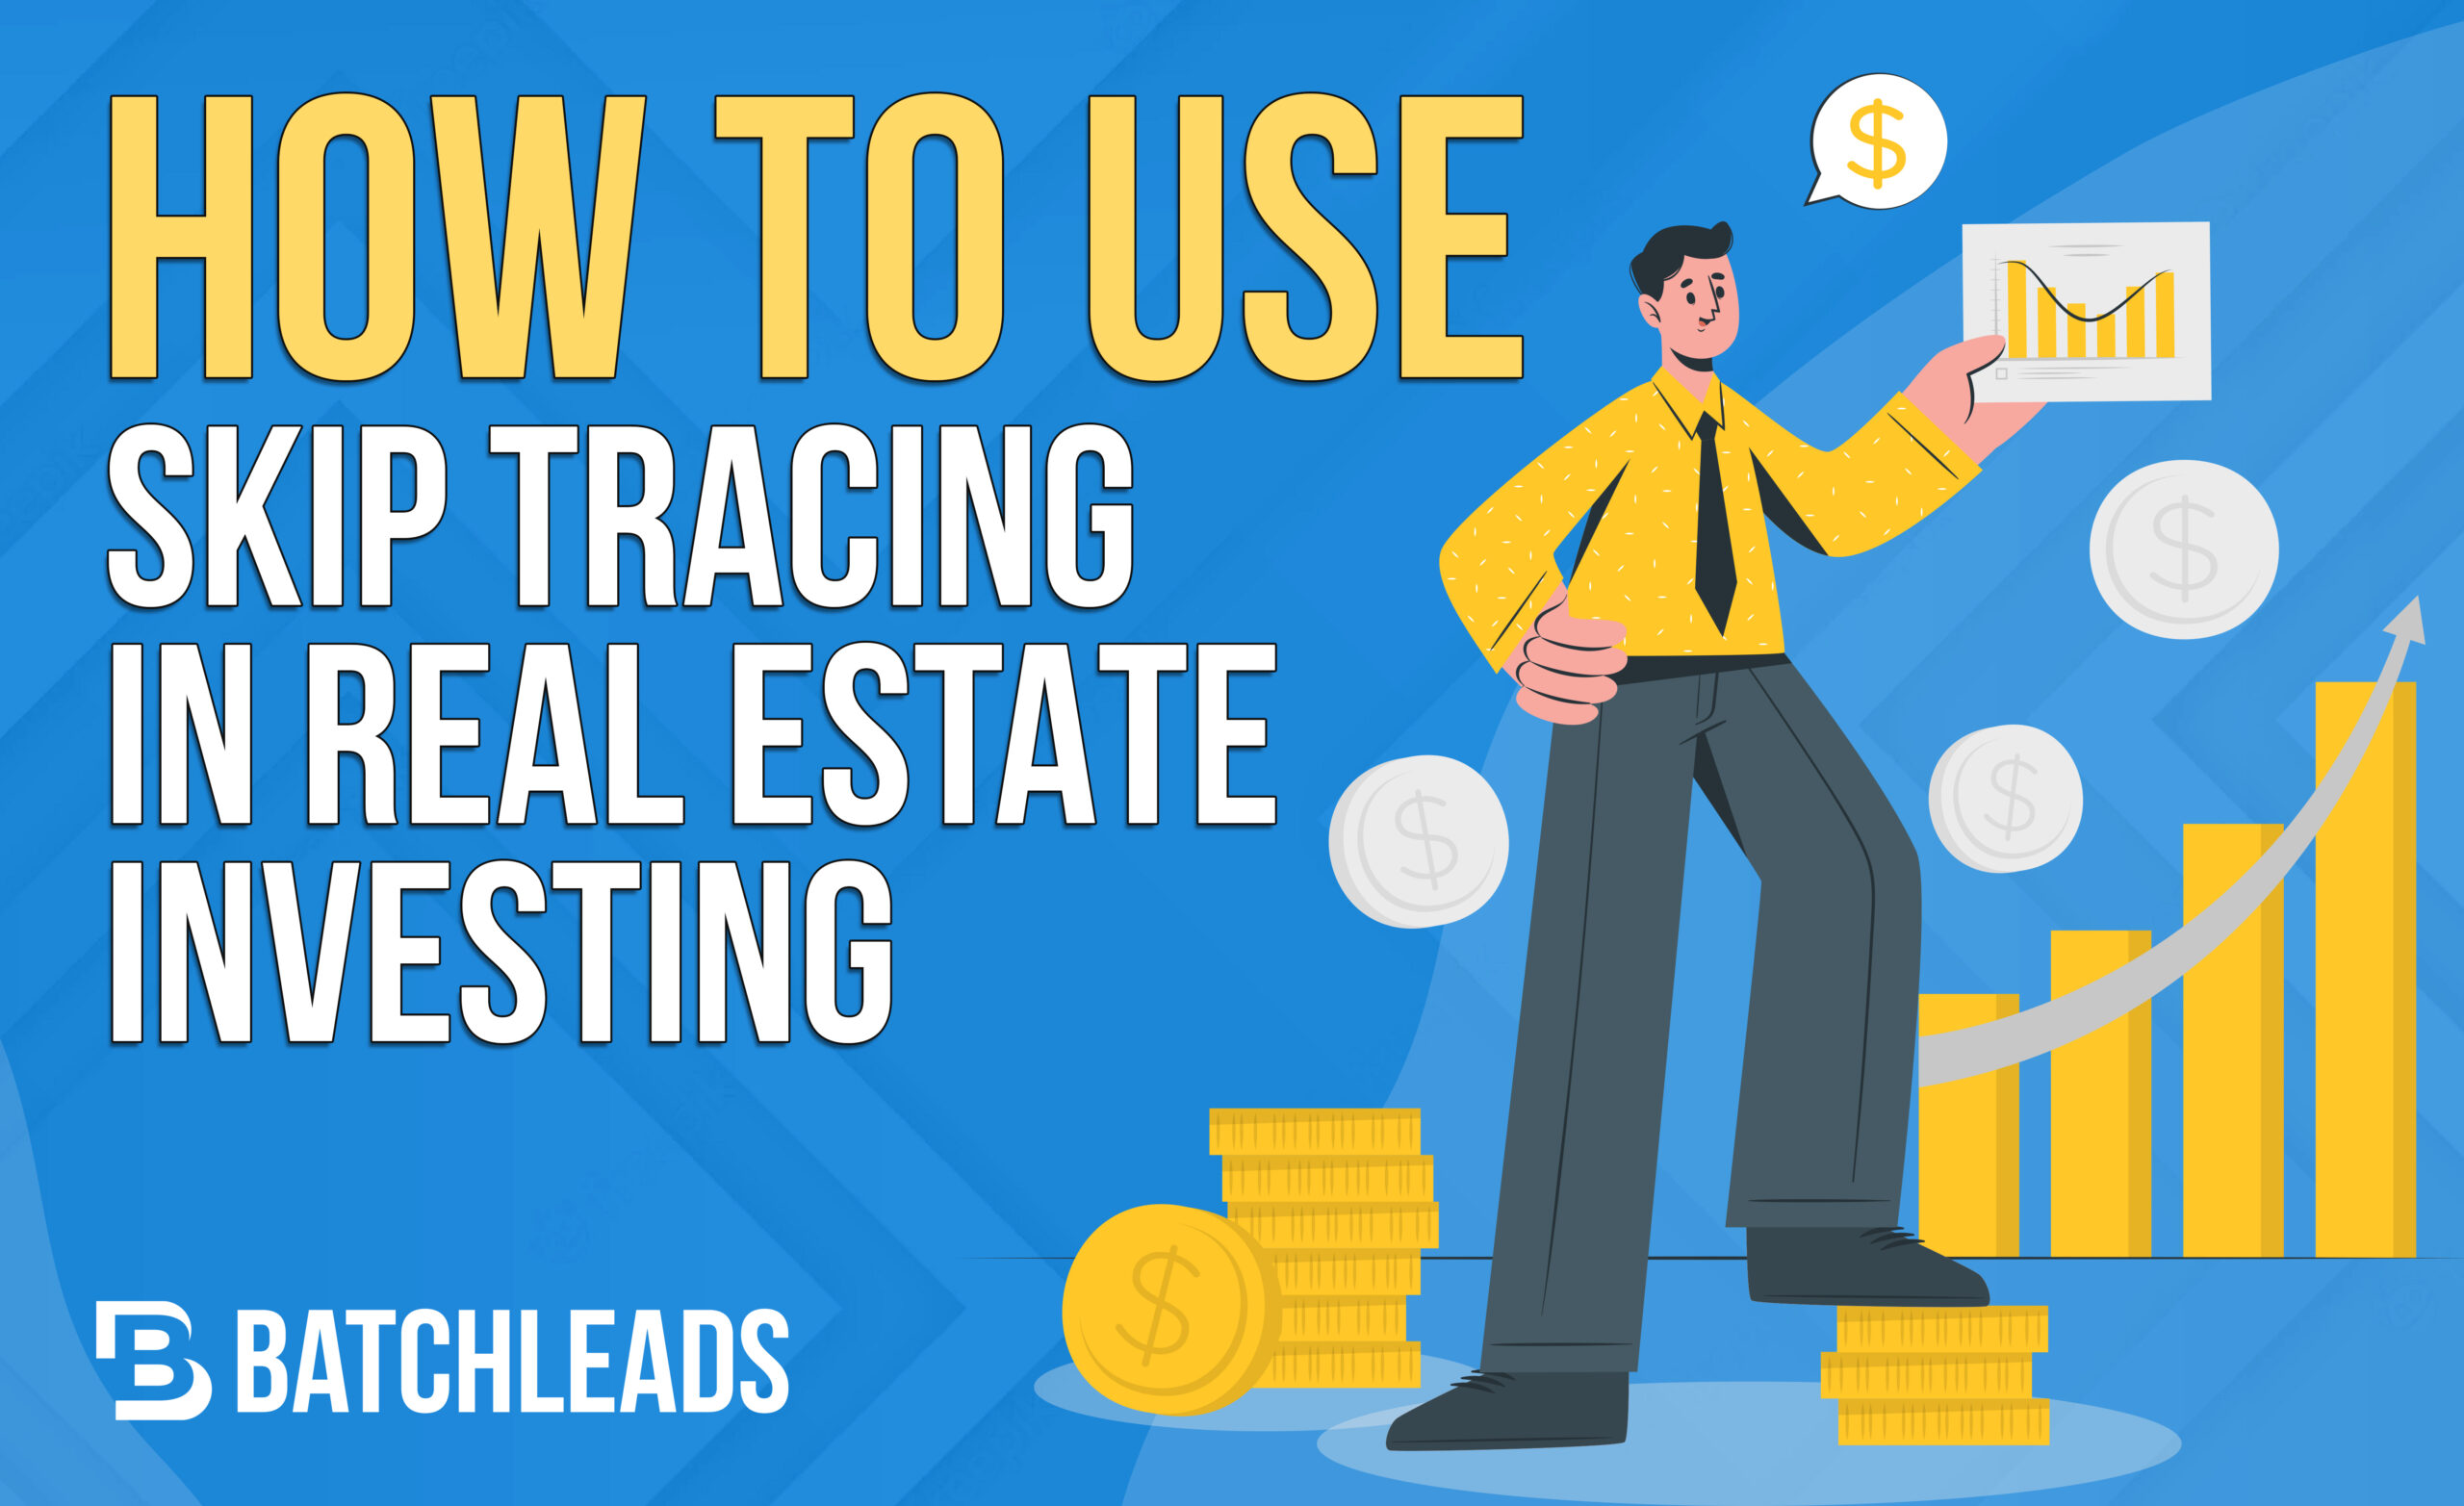 How to use skip tracing in real estate investing